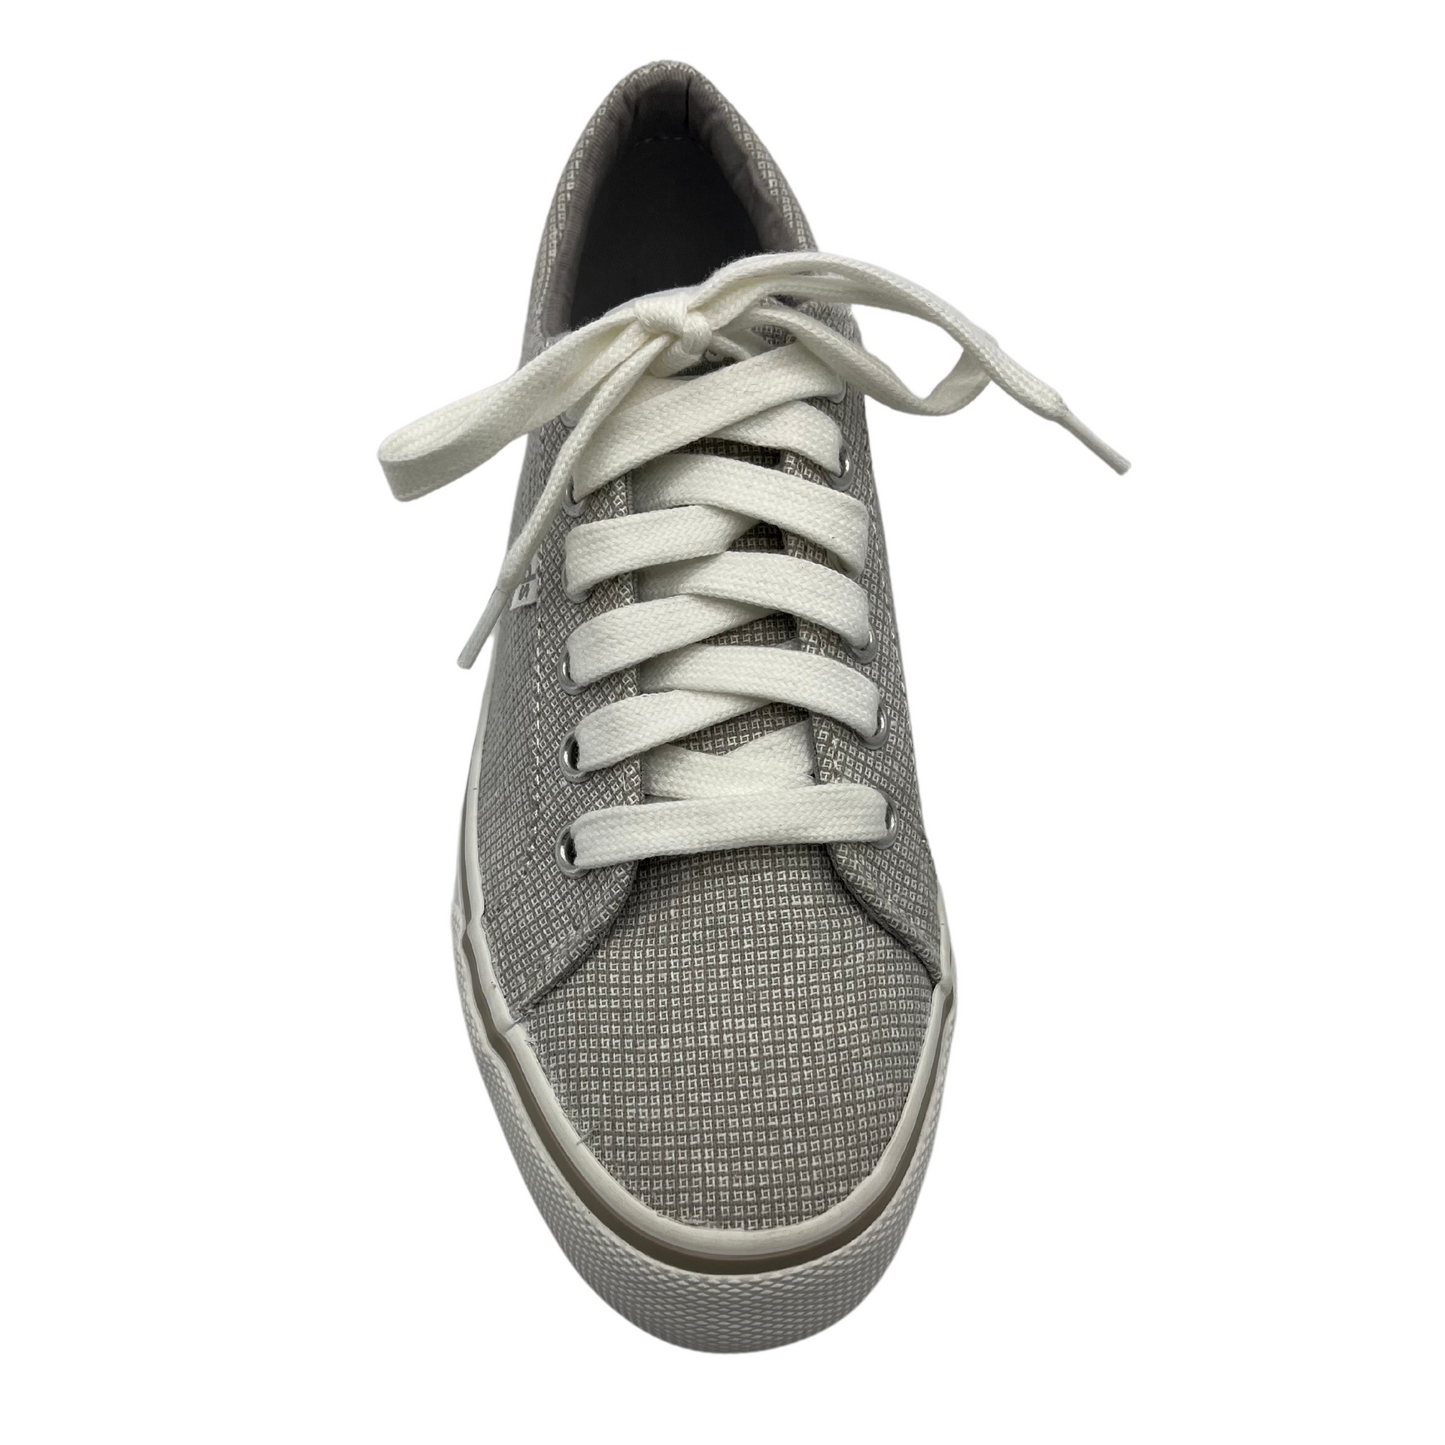 Top view of grey check canvas sneaker with white rubber outsole, white laces and padded collar